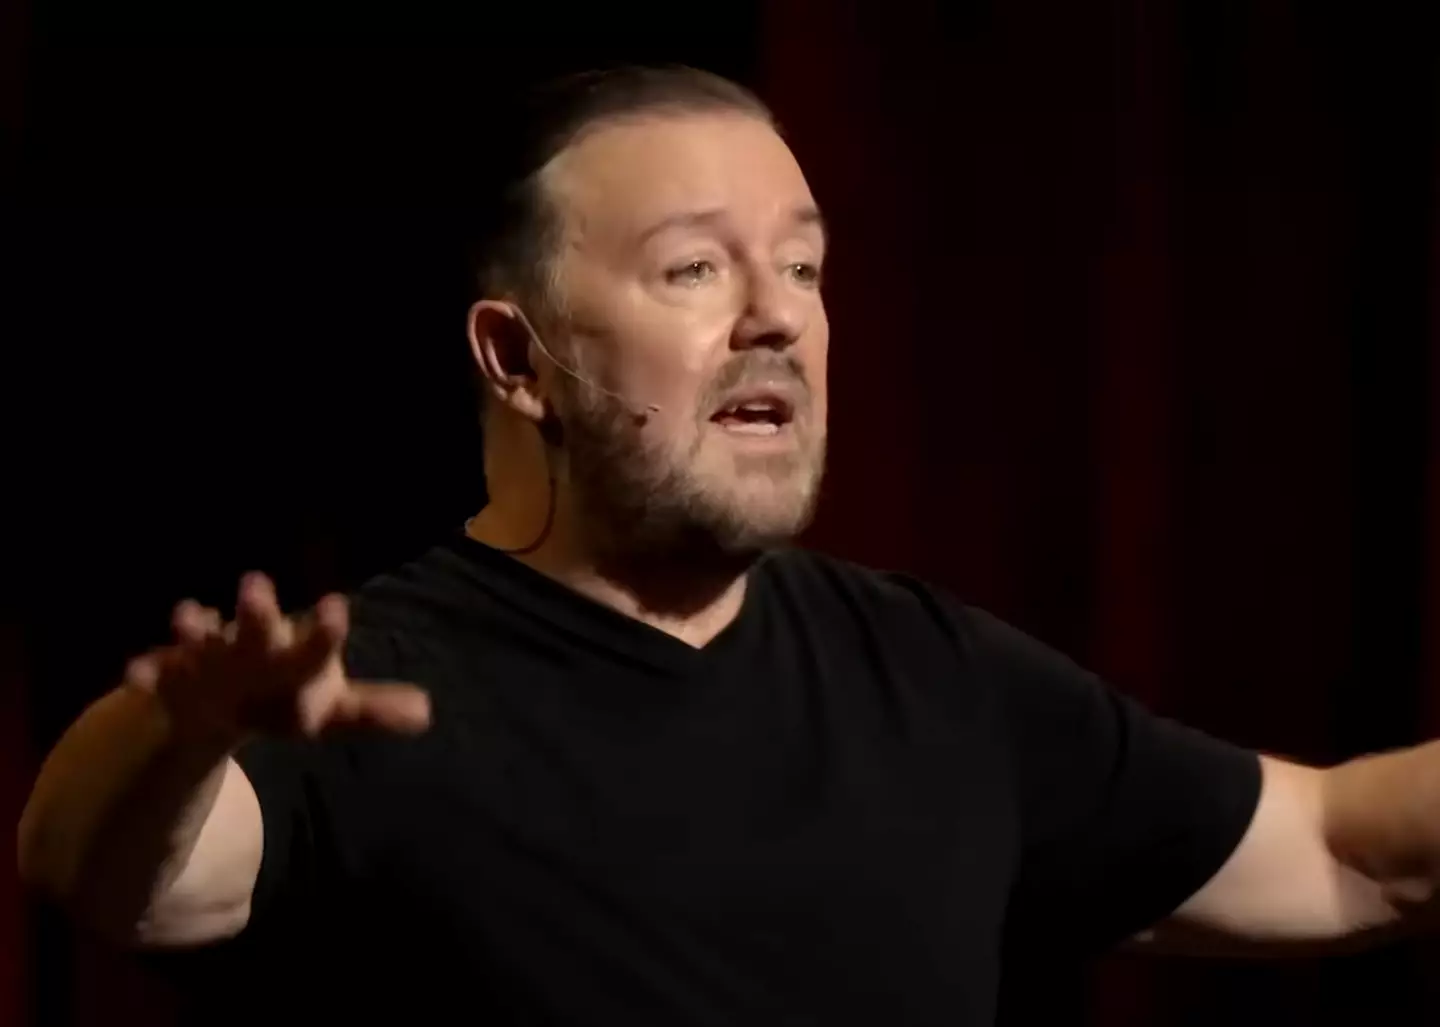 Ricky Gervais' latest Netflix special has received a flurry of backlash online.